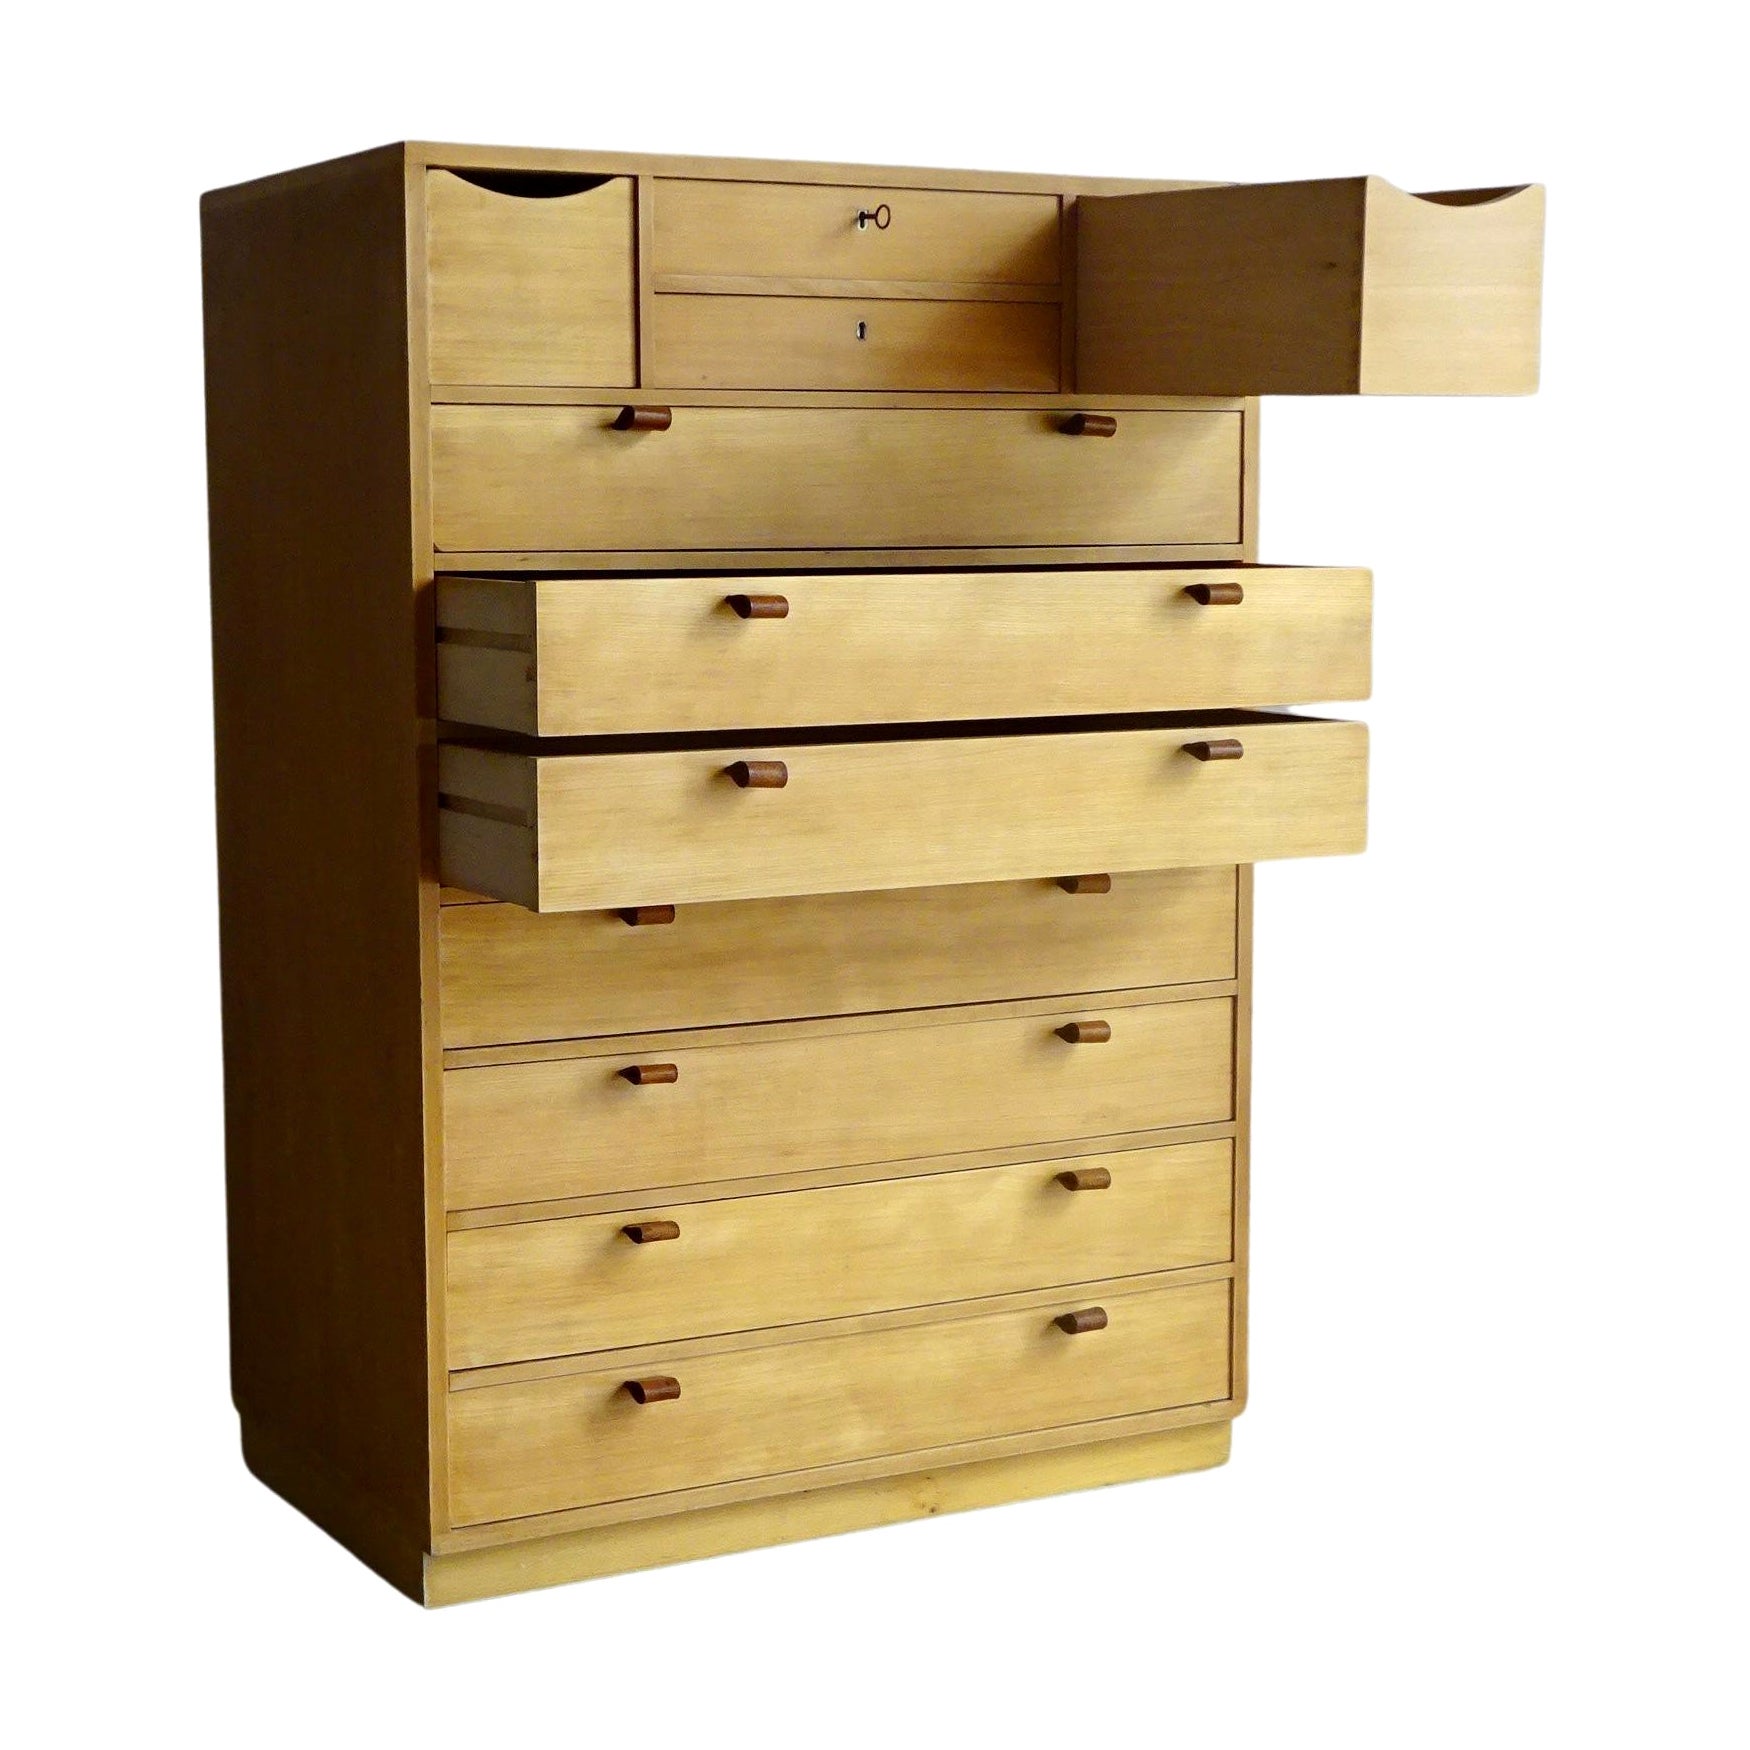 C-24 Chest of Drawers by Jordi Casablancas, Catalonia, 1970s For Sale